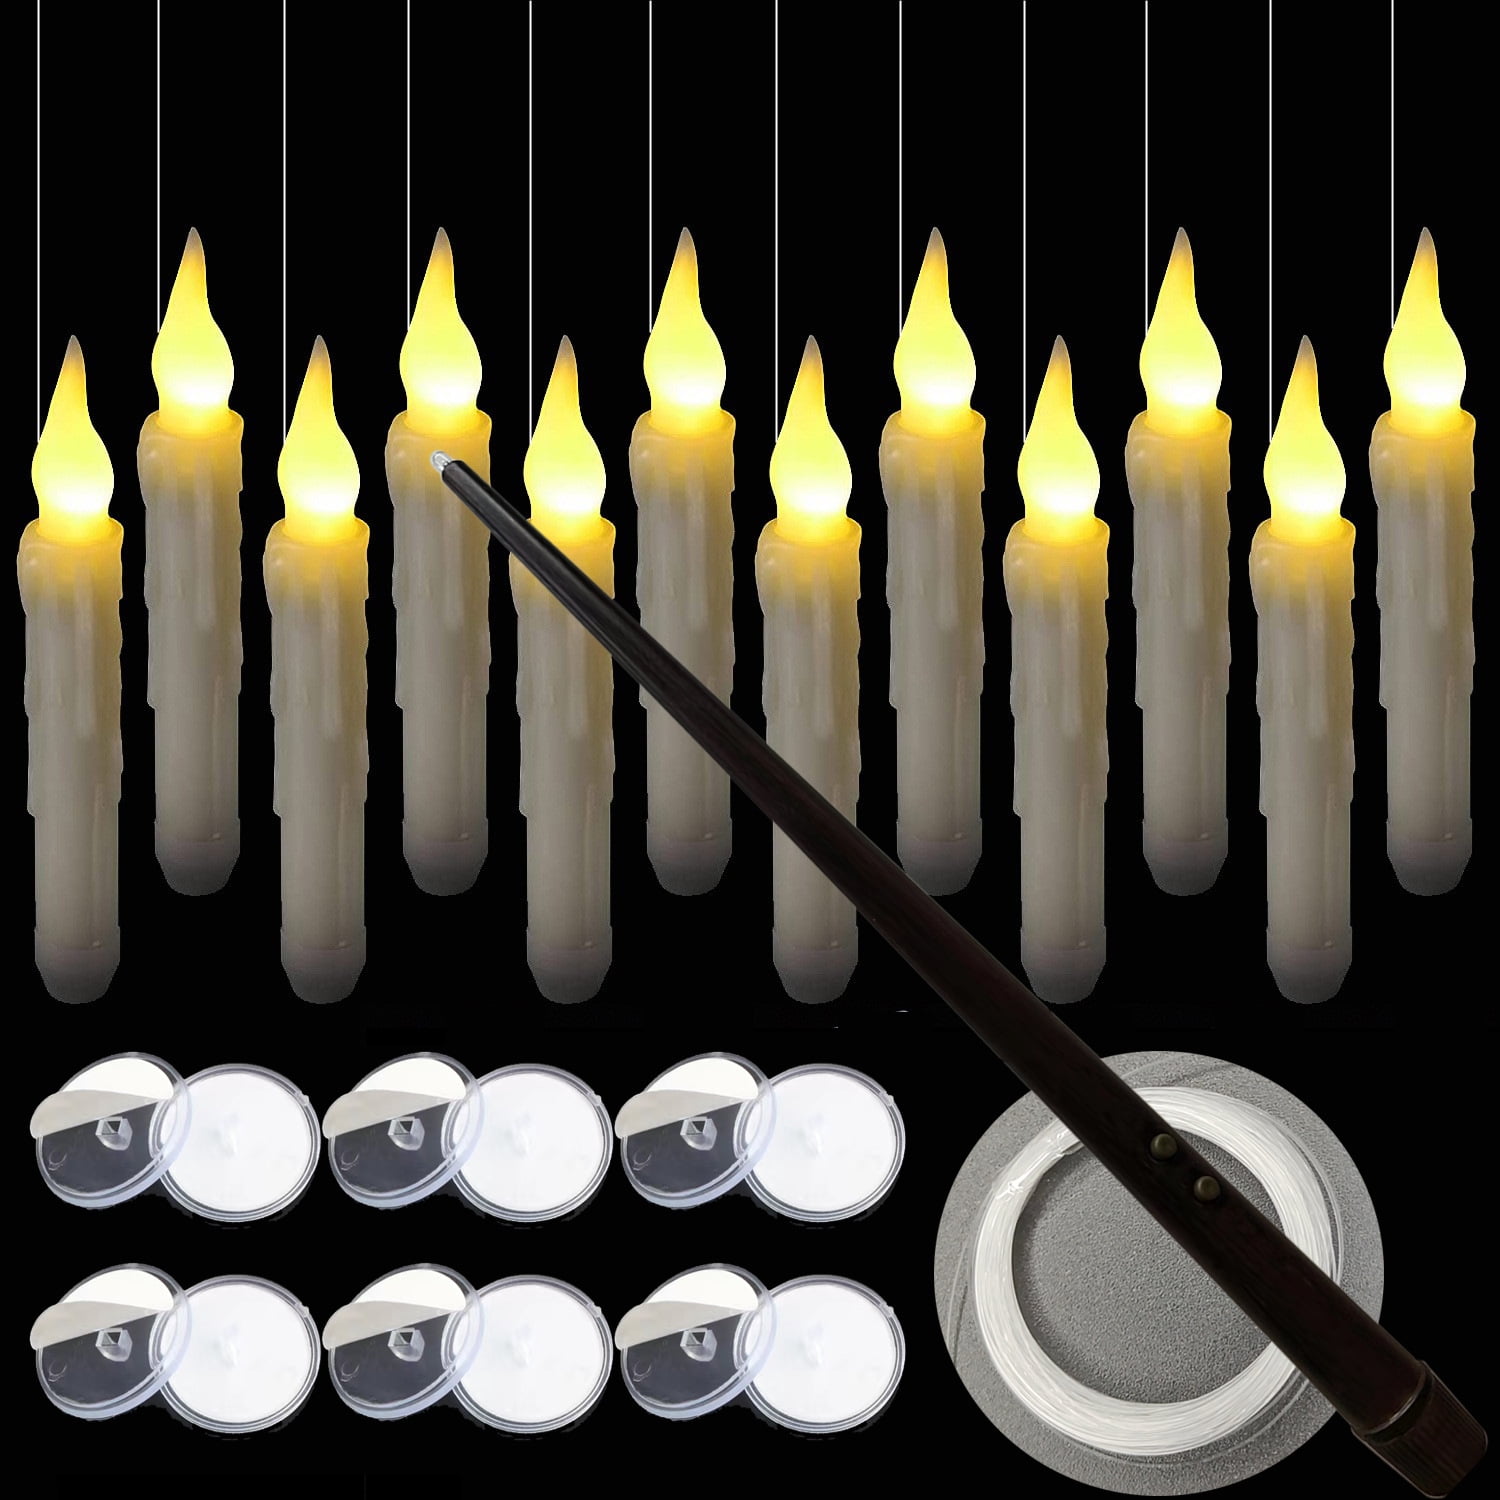 Flameless Candles With Magic Wand Remote For Halloween Decor, 6.6 Floating  Candles Battery Operated Hanging Window Candles, Flickering Electric LED